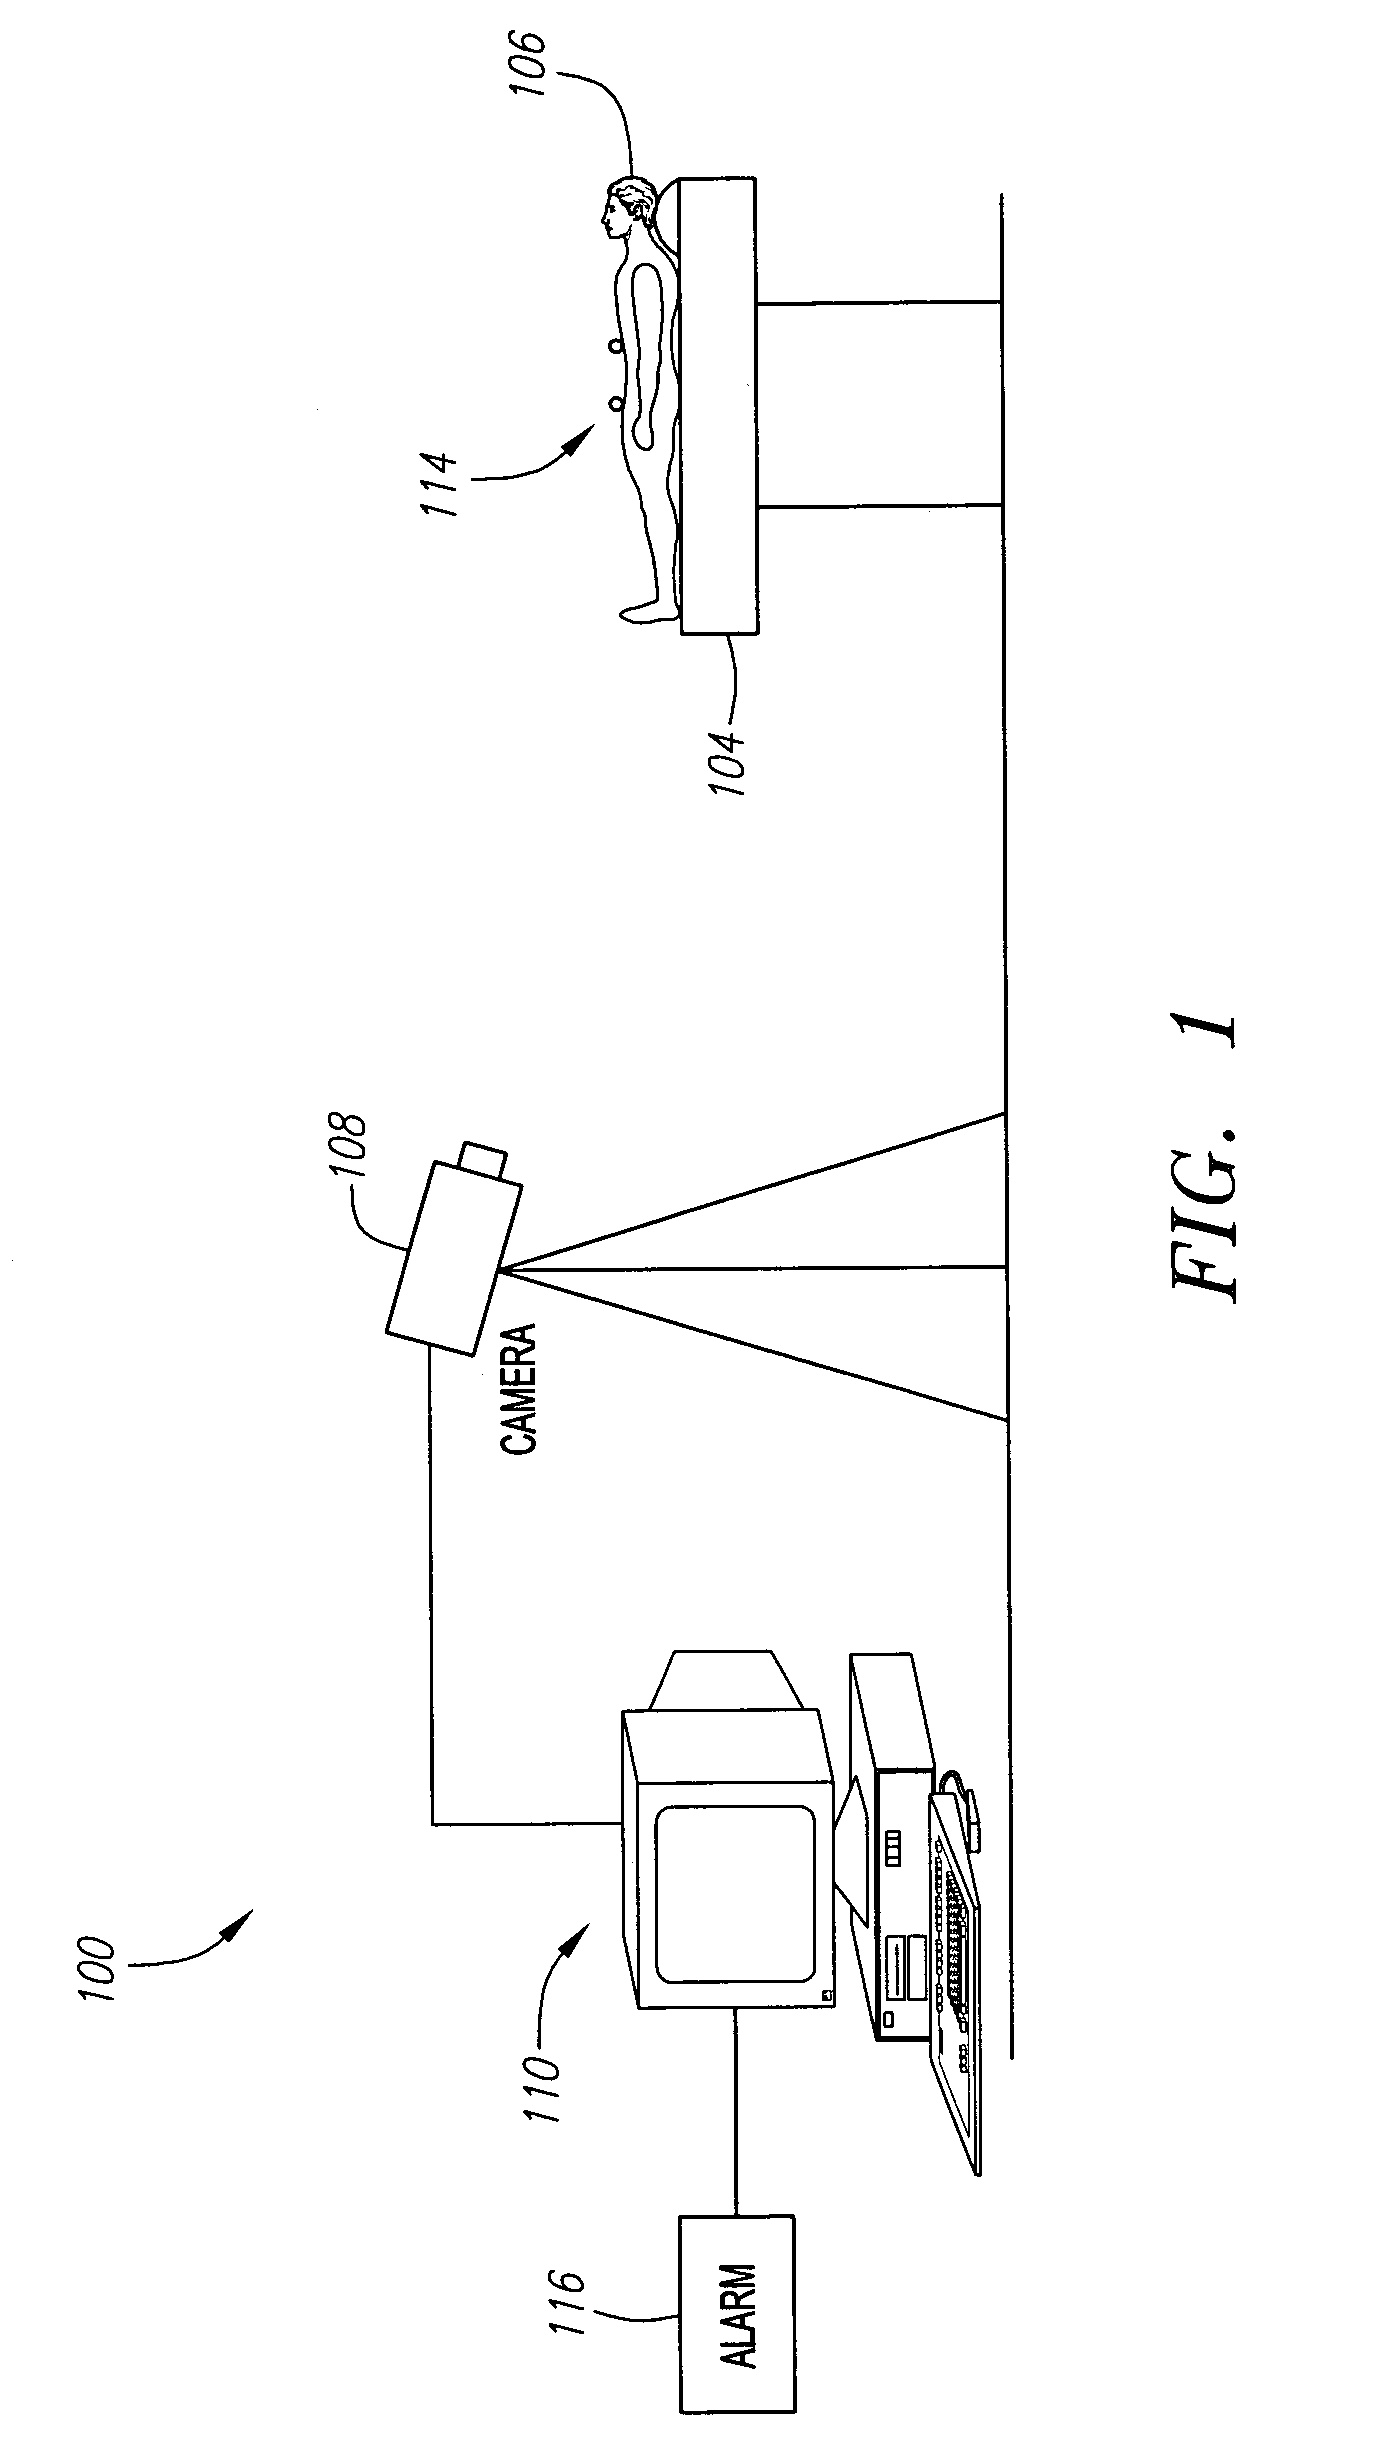 Method and system for monitoring breathing activity of a subject